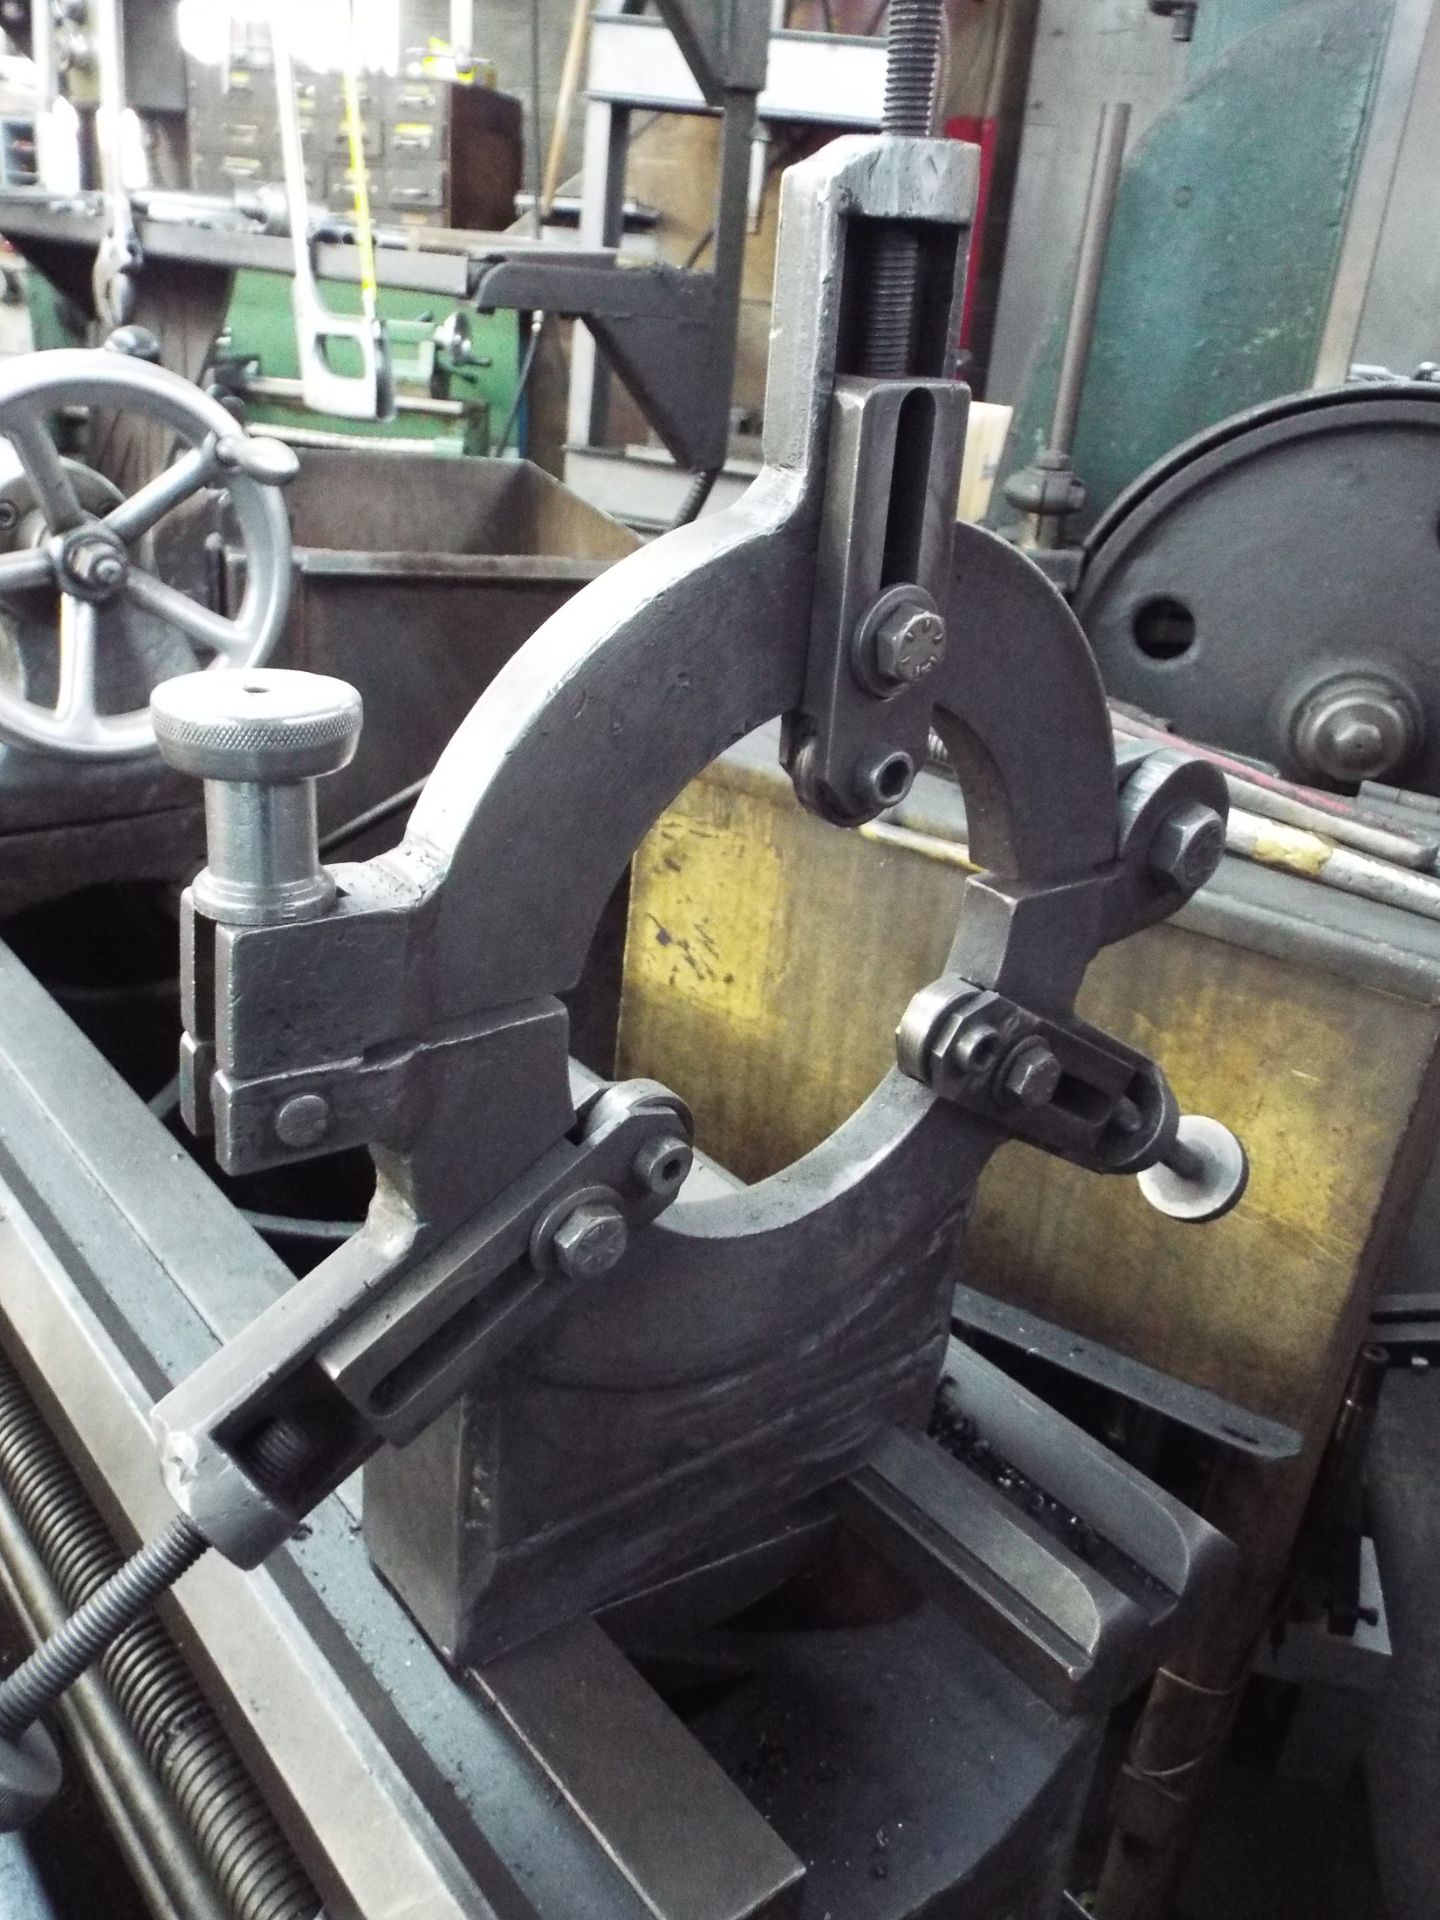 MEUSER & CO. ENGINE LATHE WITH 18" SWING, APPROX. 66" BETWEEN CENTERS, 2" SPINDLE BORE, SPEEDS TO - Image 7 of 8